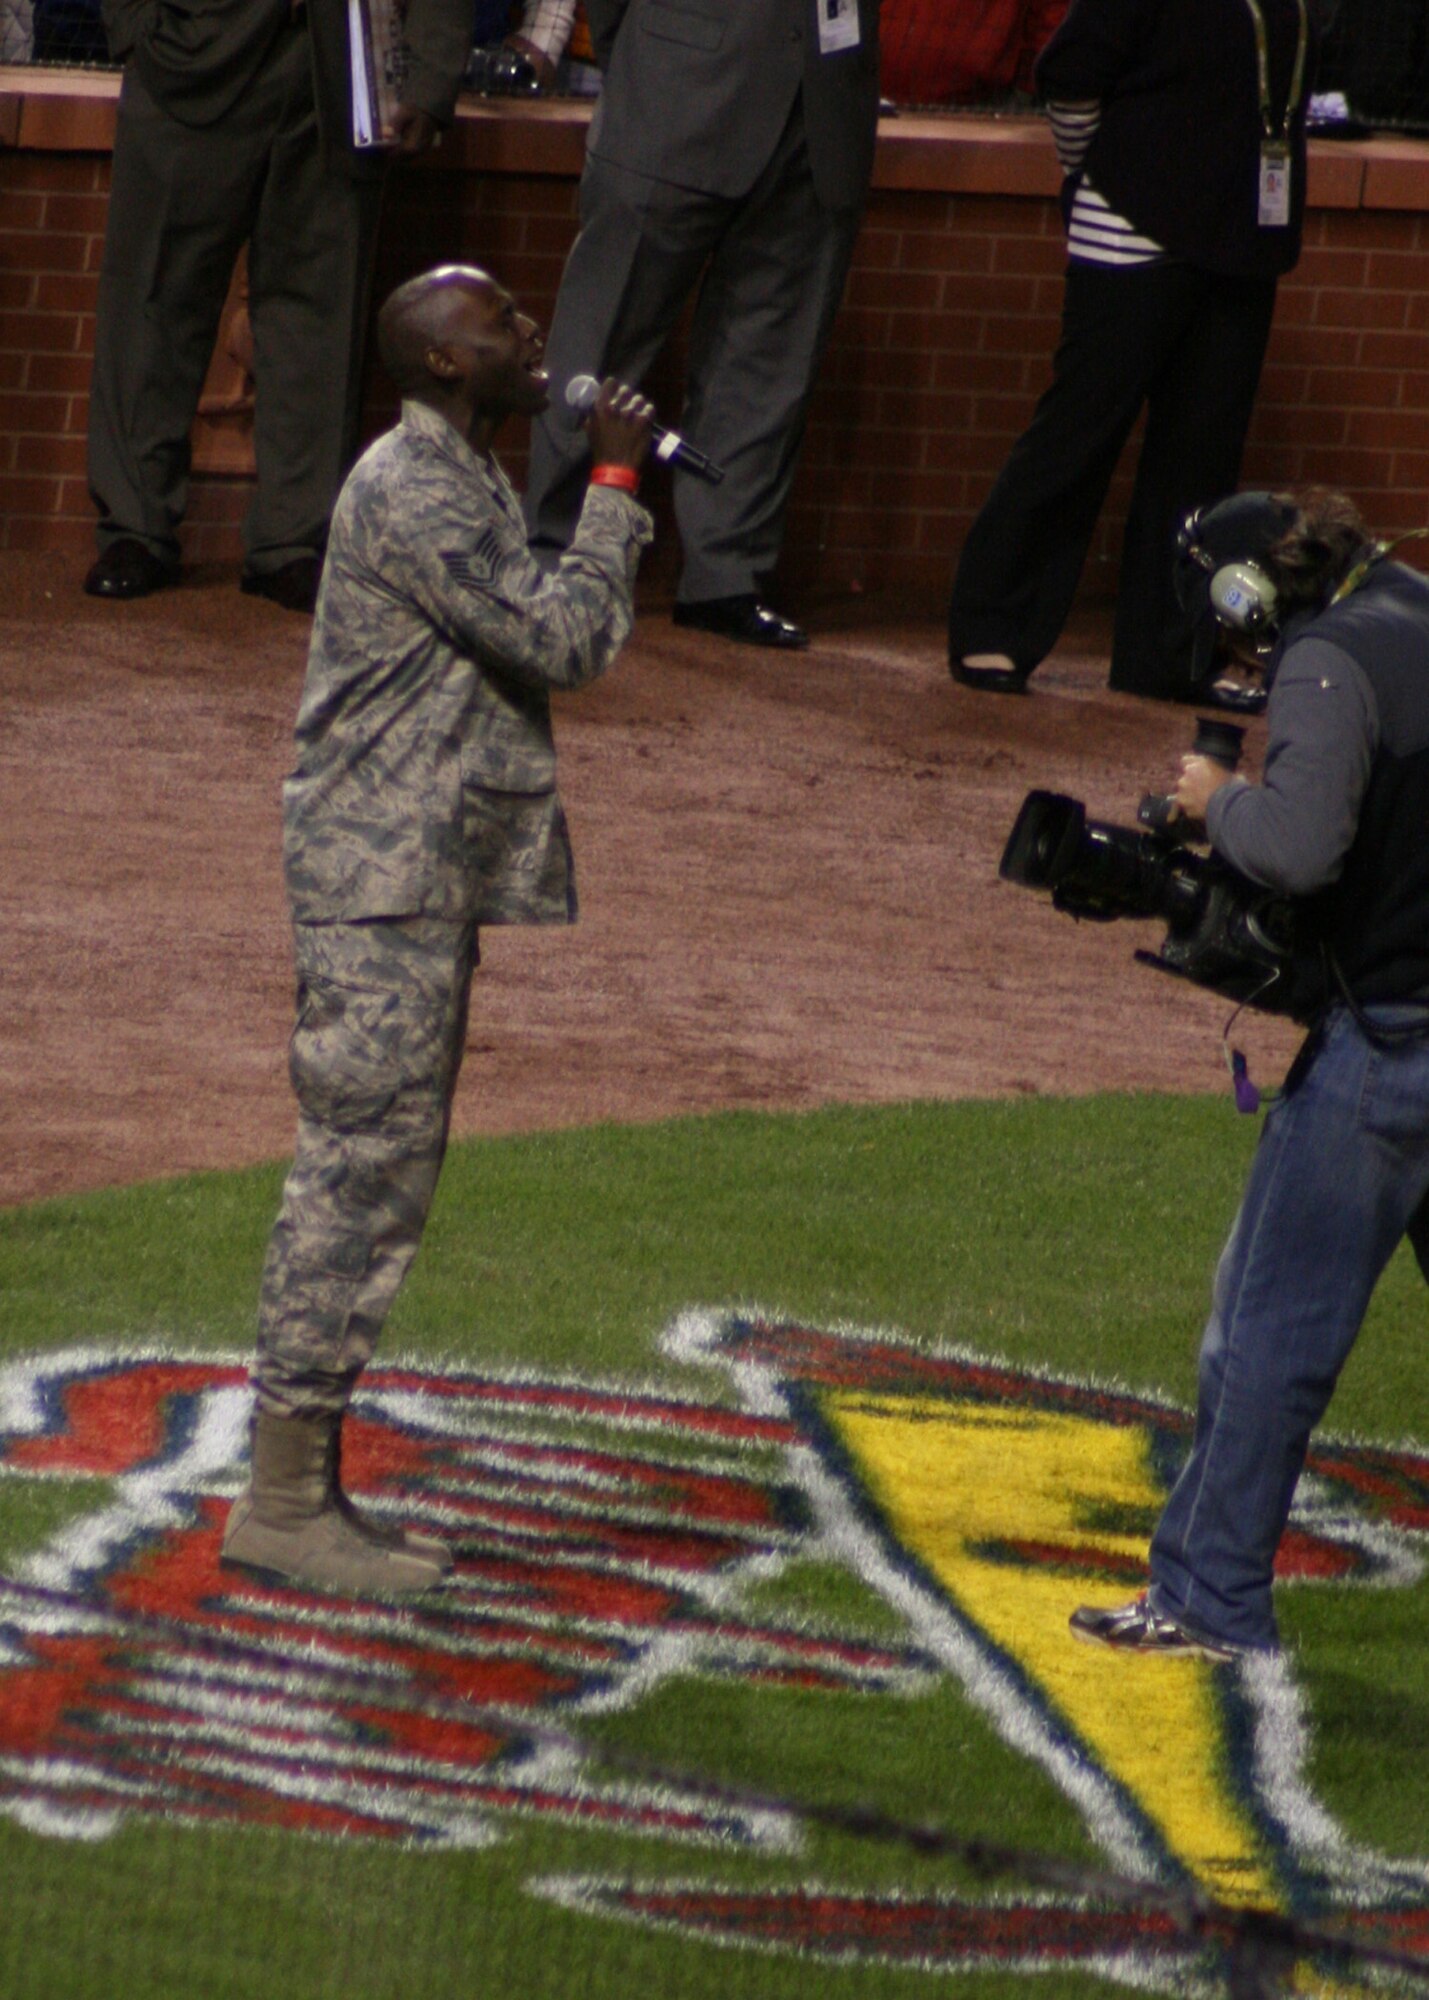 Staff Sgt. Brian Owens, of the 571st Air National Guard Band of the Central States,
sings "God Blesss America" during the 7th inning stretch of Game 1 of the 2011 World Series at Busch Stadium, Oct 19.  The 571st is based at the 131st Bomb Wing, Lambert Air National Guard Base, Saint.Louis.  (Photo by Matthew J. Wilson)
